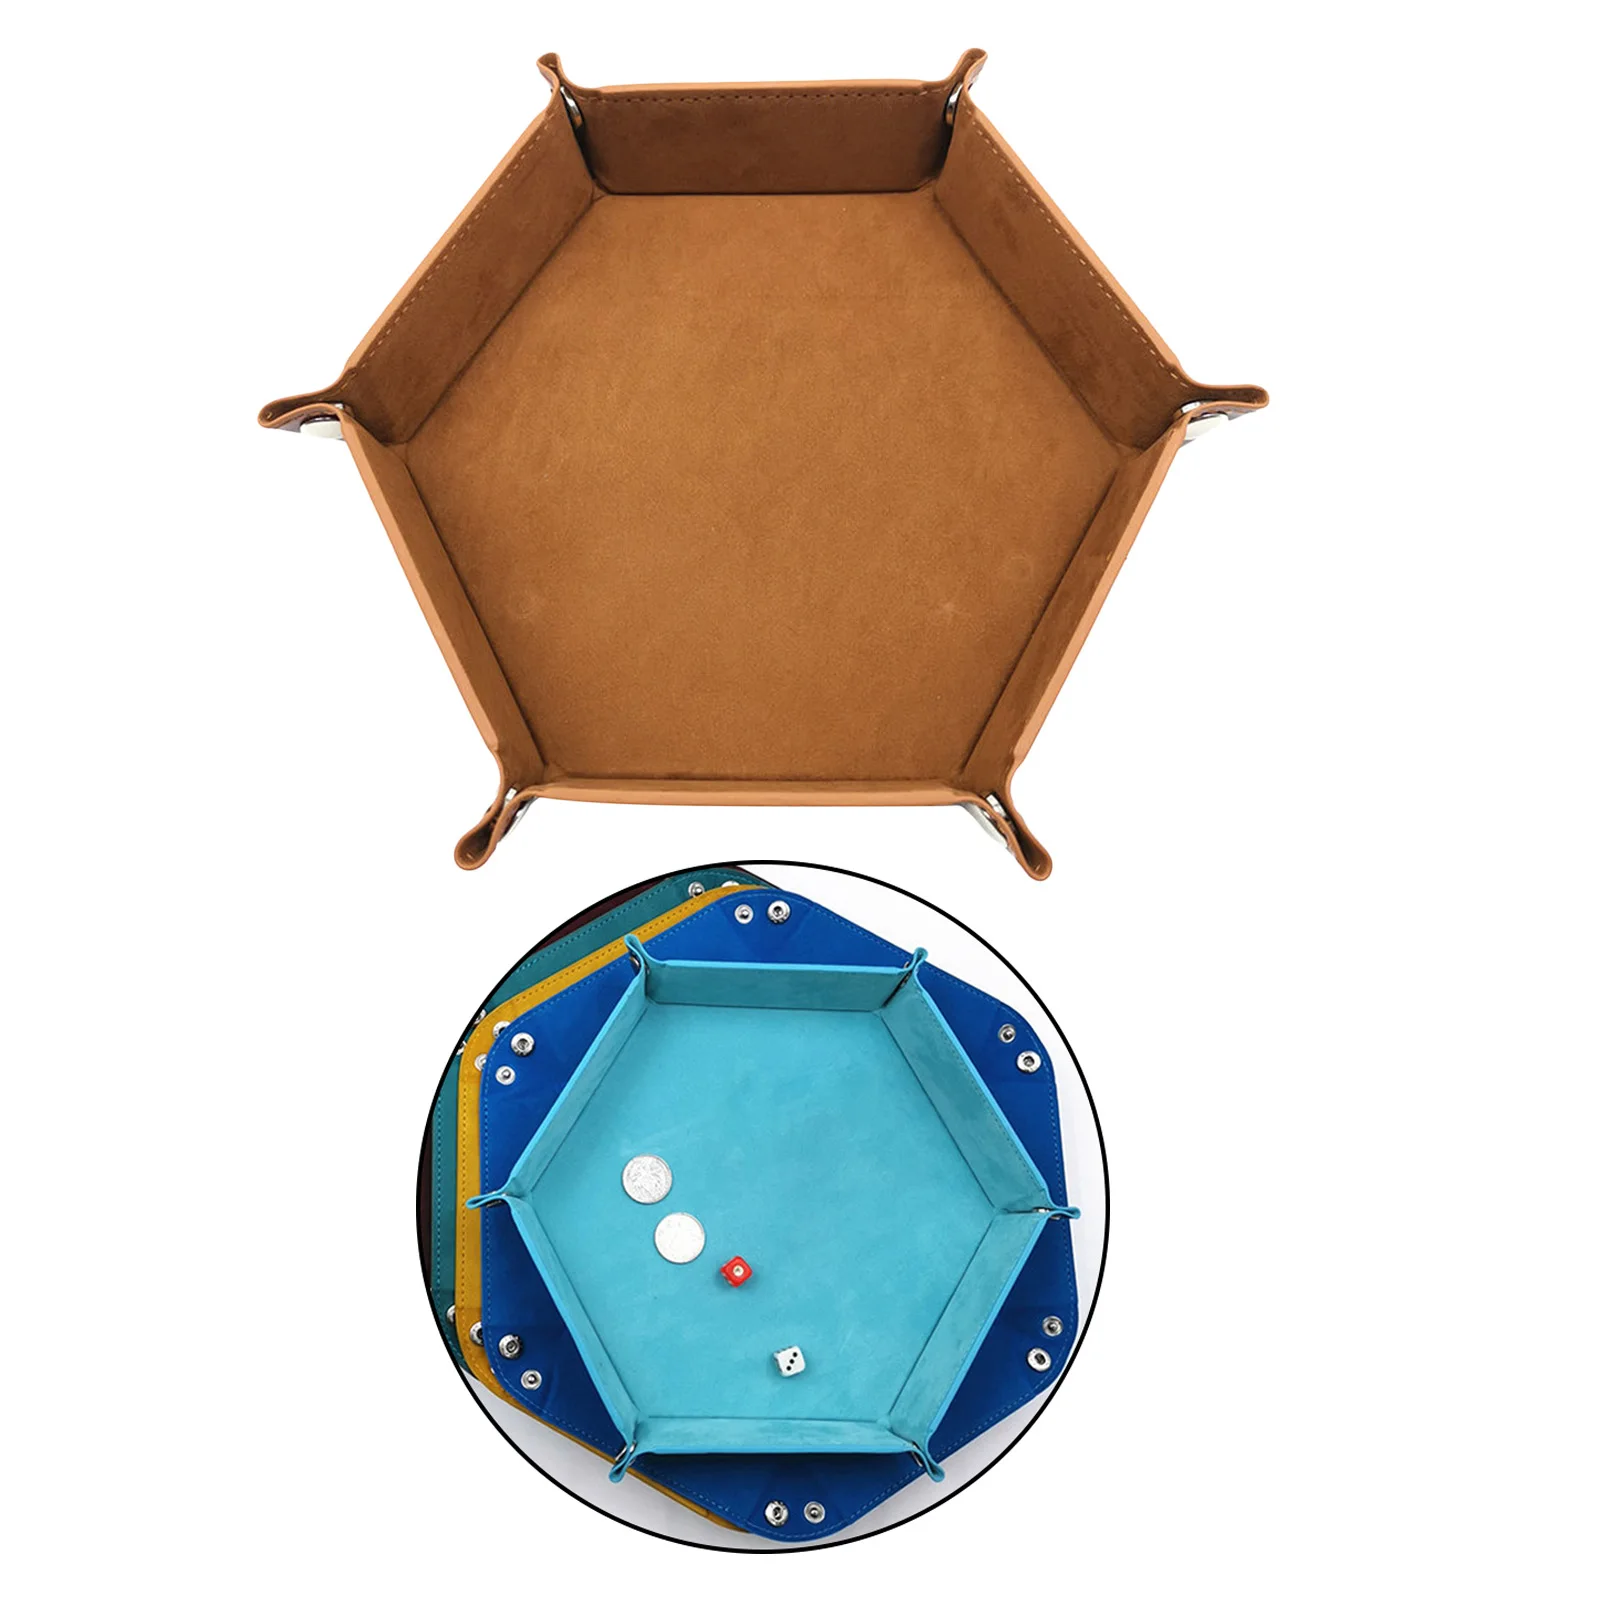 Rolling Folding Hexagon Dice Game Storage Tray Holder Double Sided PU Leather&Velvet Dice Rolling Tray Casino Supplies